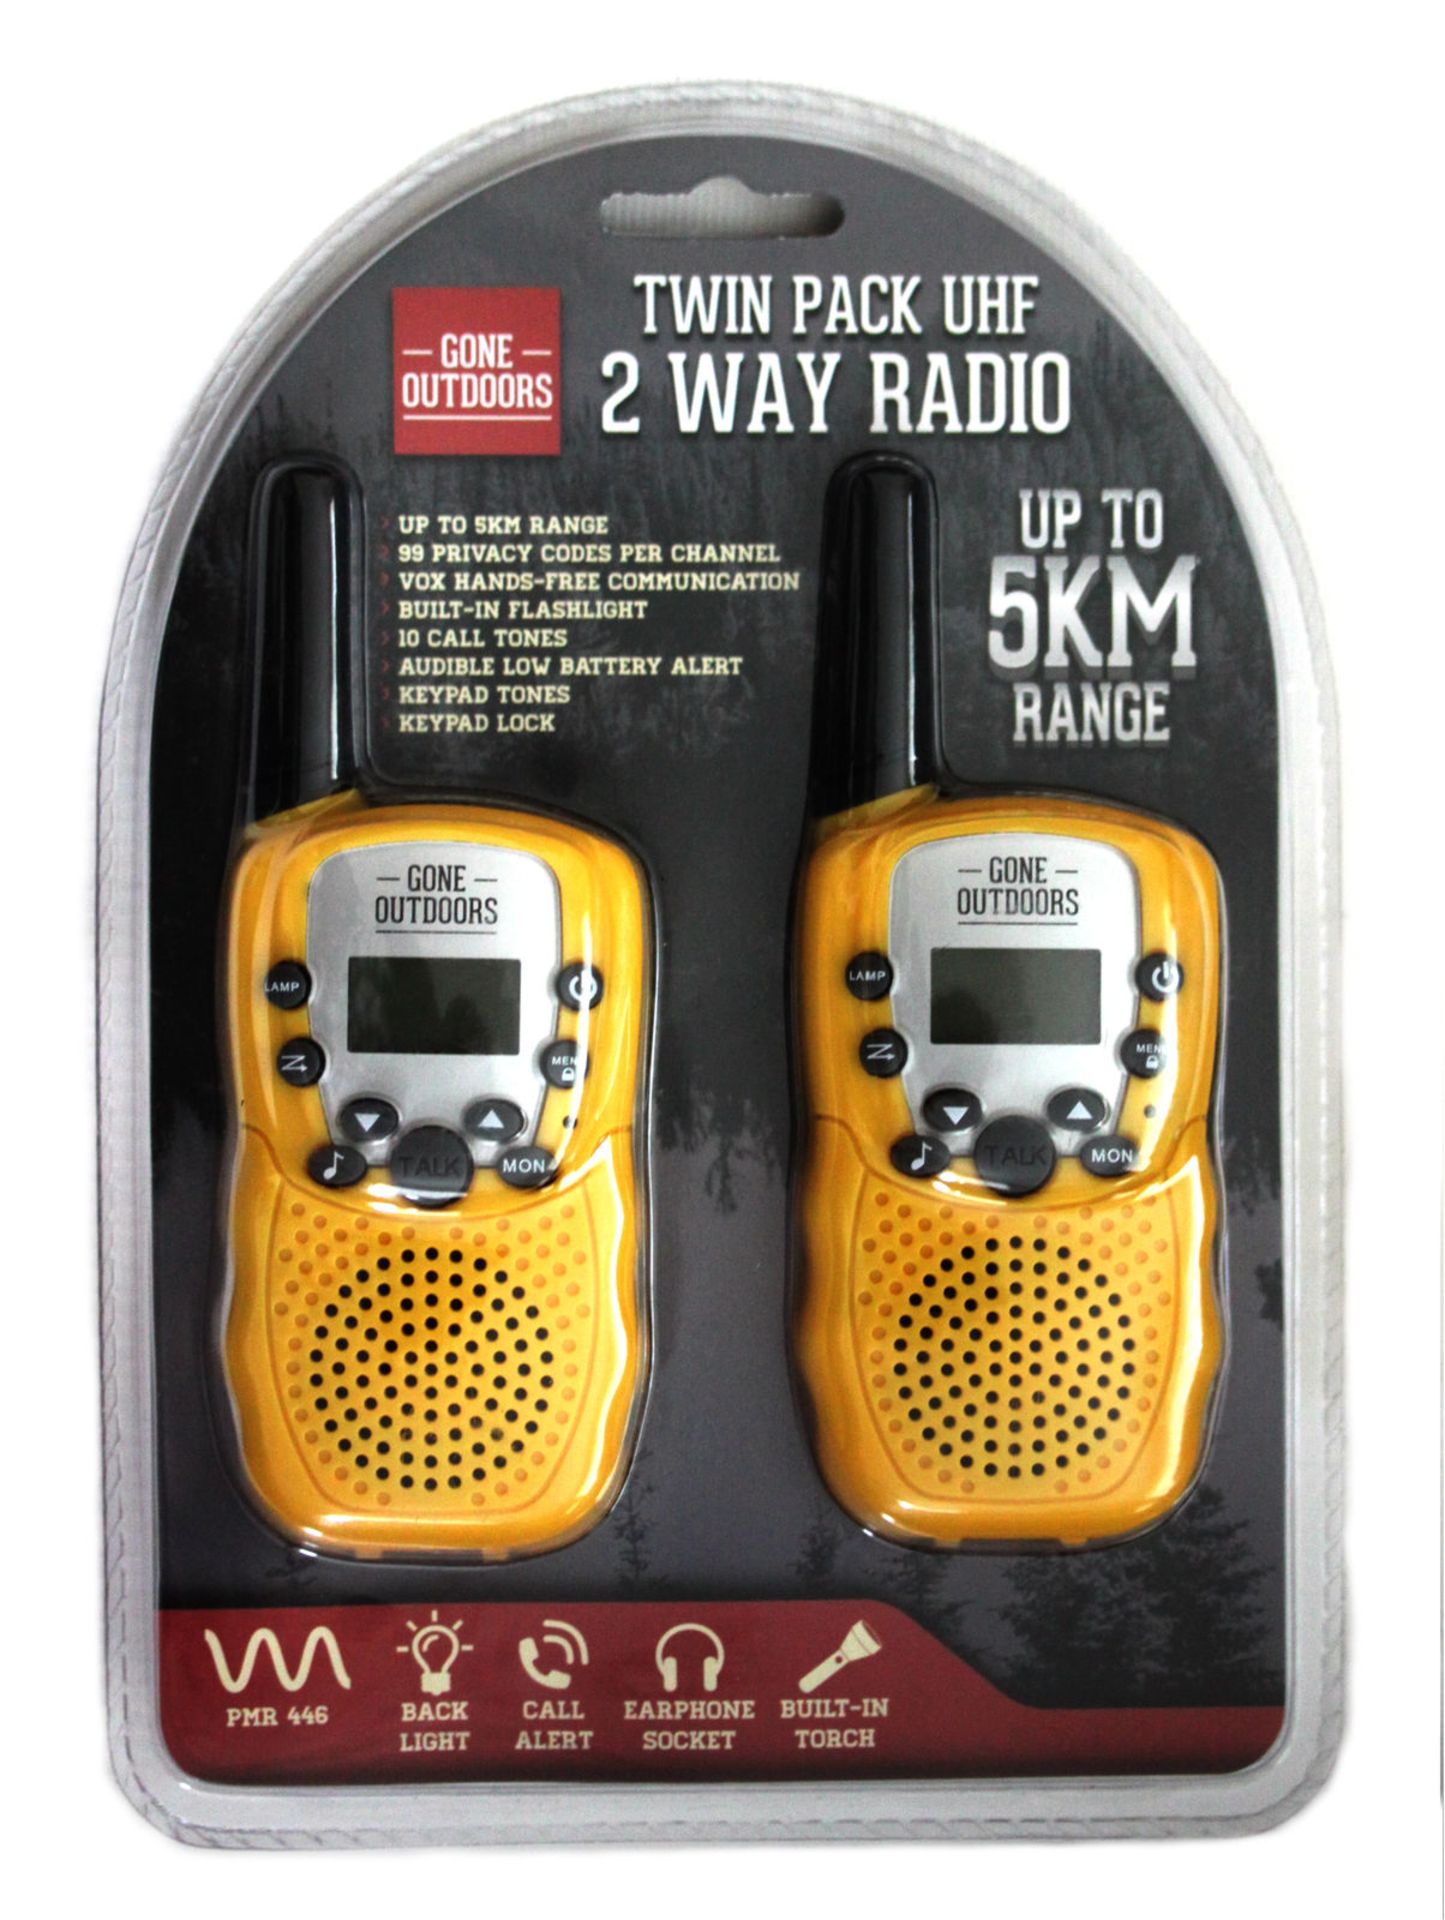 V Brand New Gone Outdoors Twin Pack UHF 2 Way Radio - Up to 5KM Range - Back Light - Call Alerts -